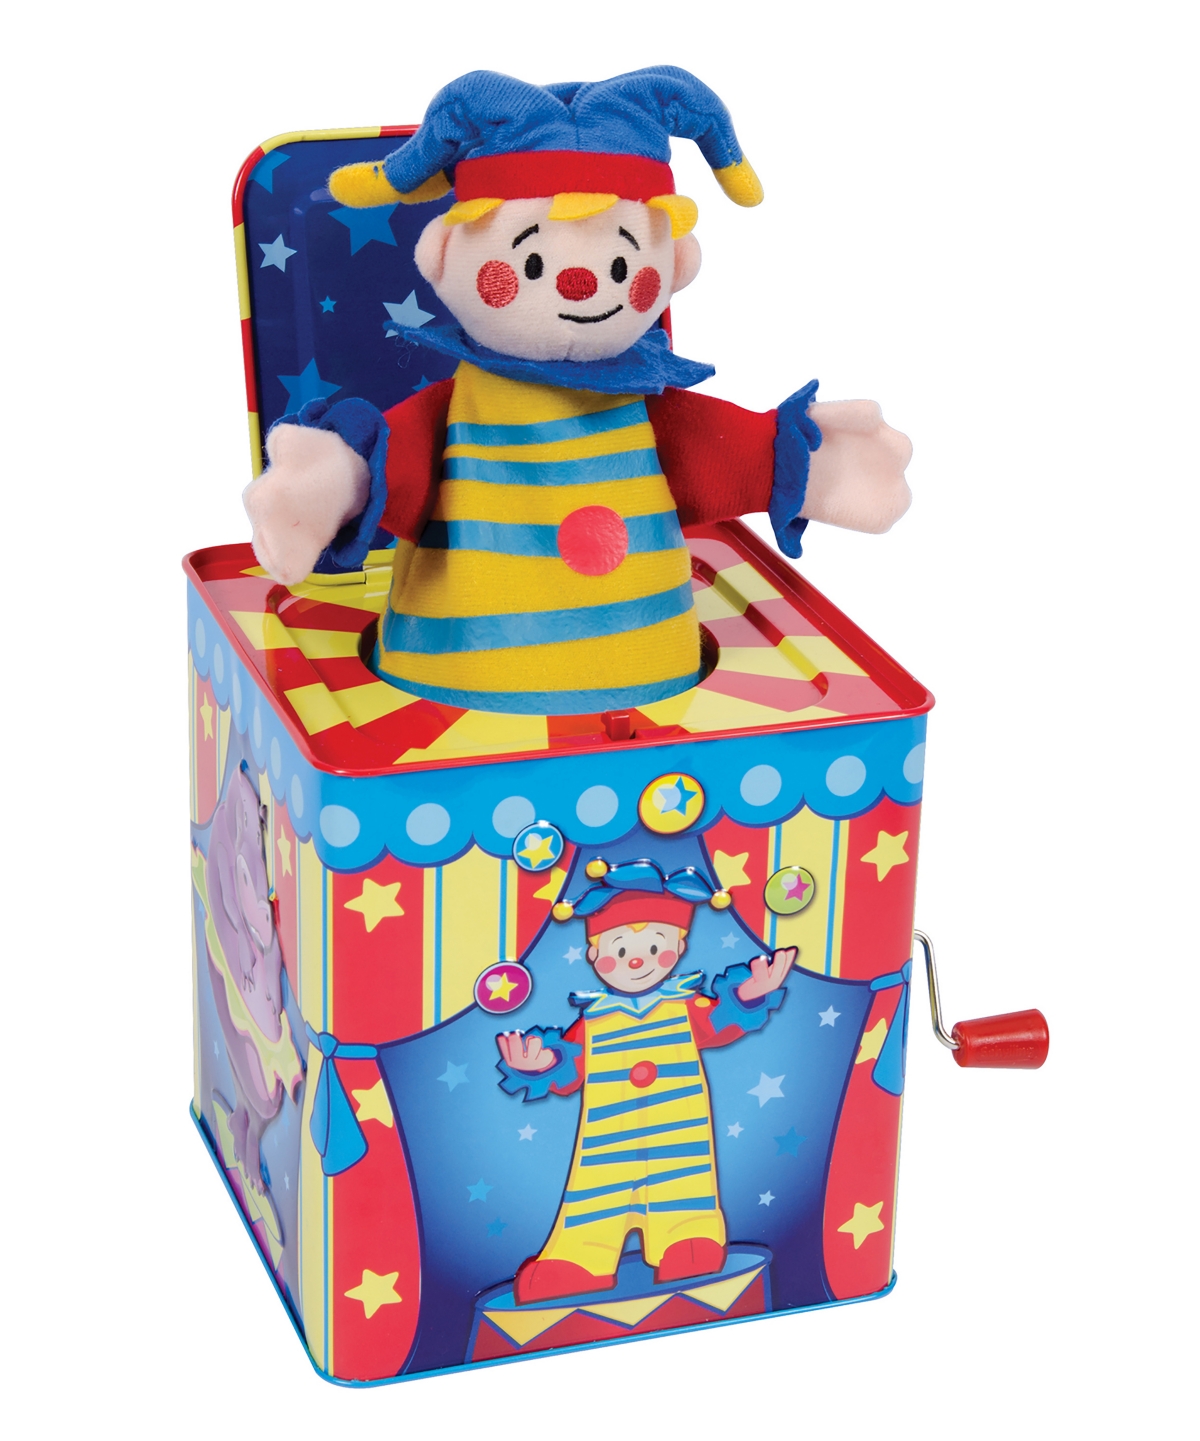 Redbox Schylling Silly Circus Jack In Box Toy In Multi